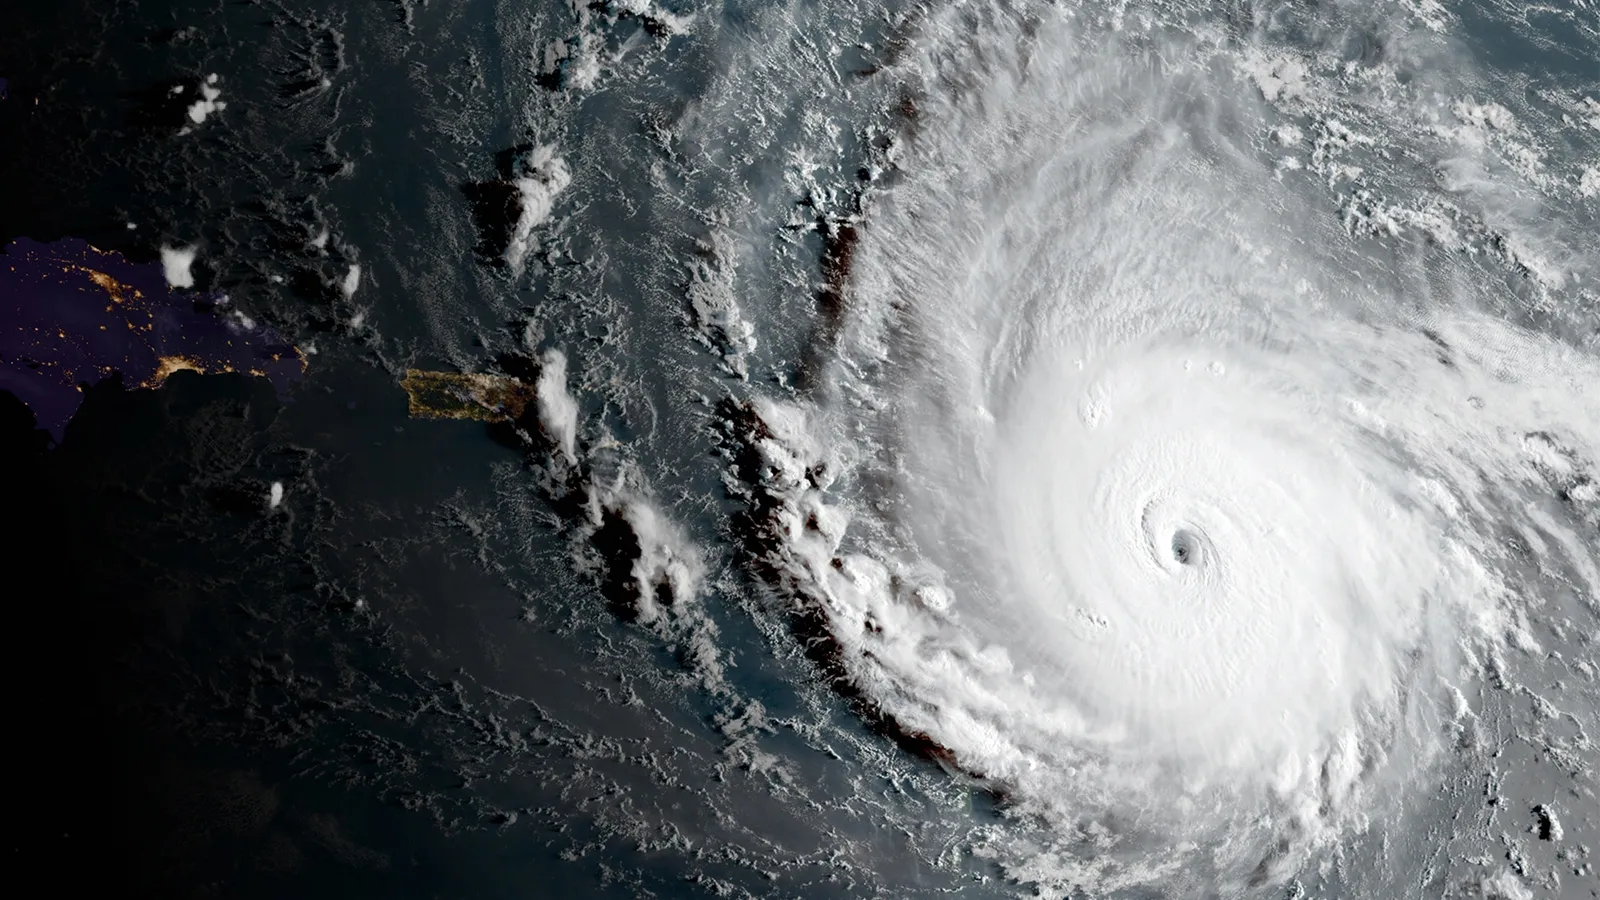 The other 'Niño' that fuels the most destructive hurricanes